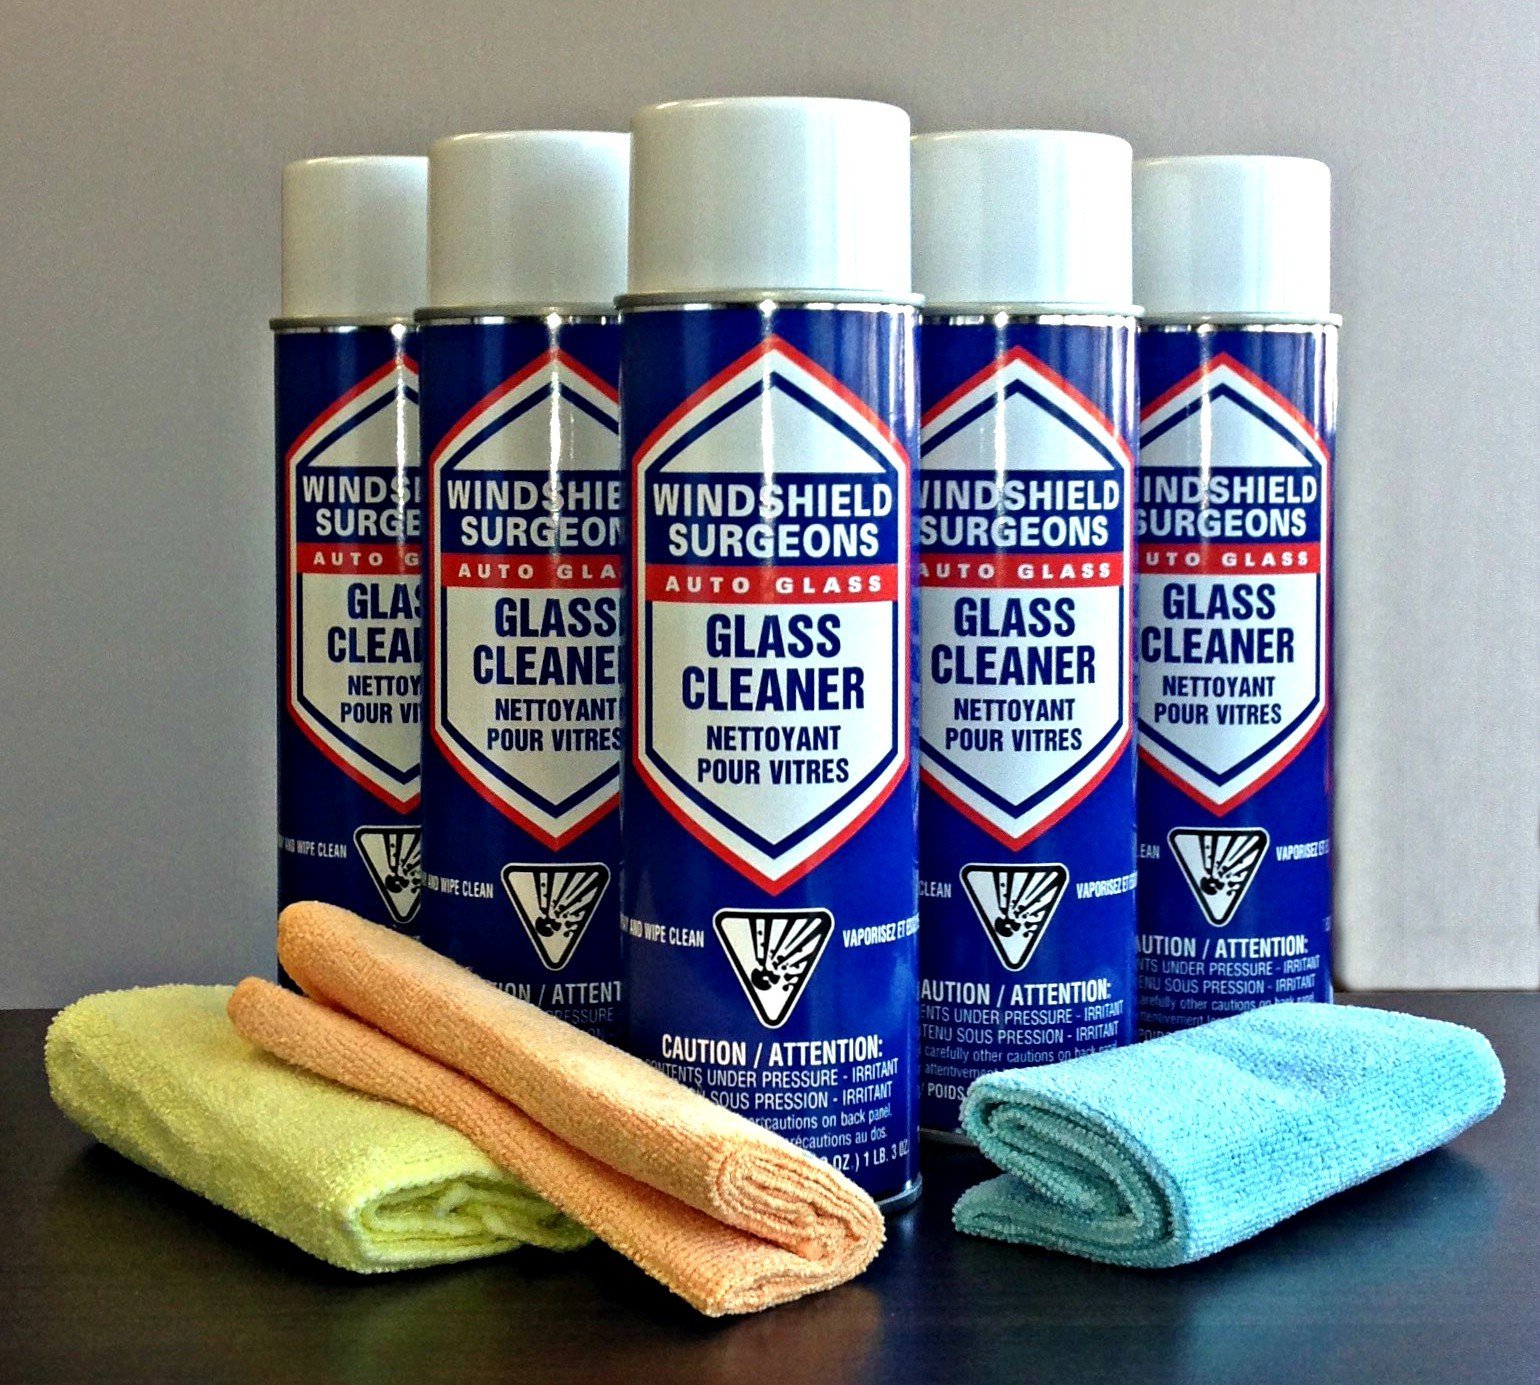 Glass cleaner and towels